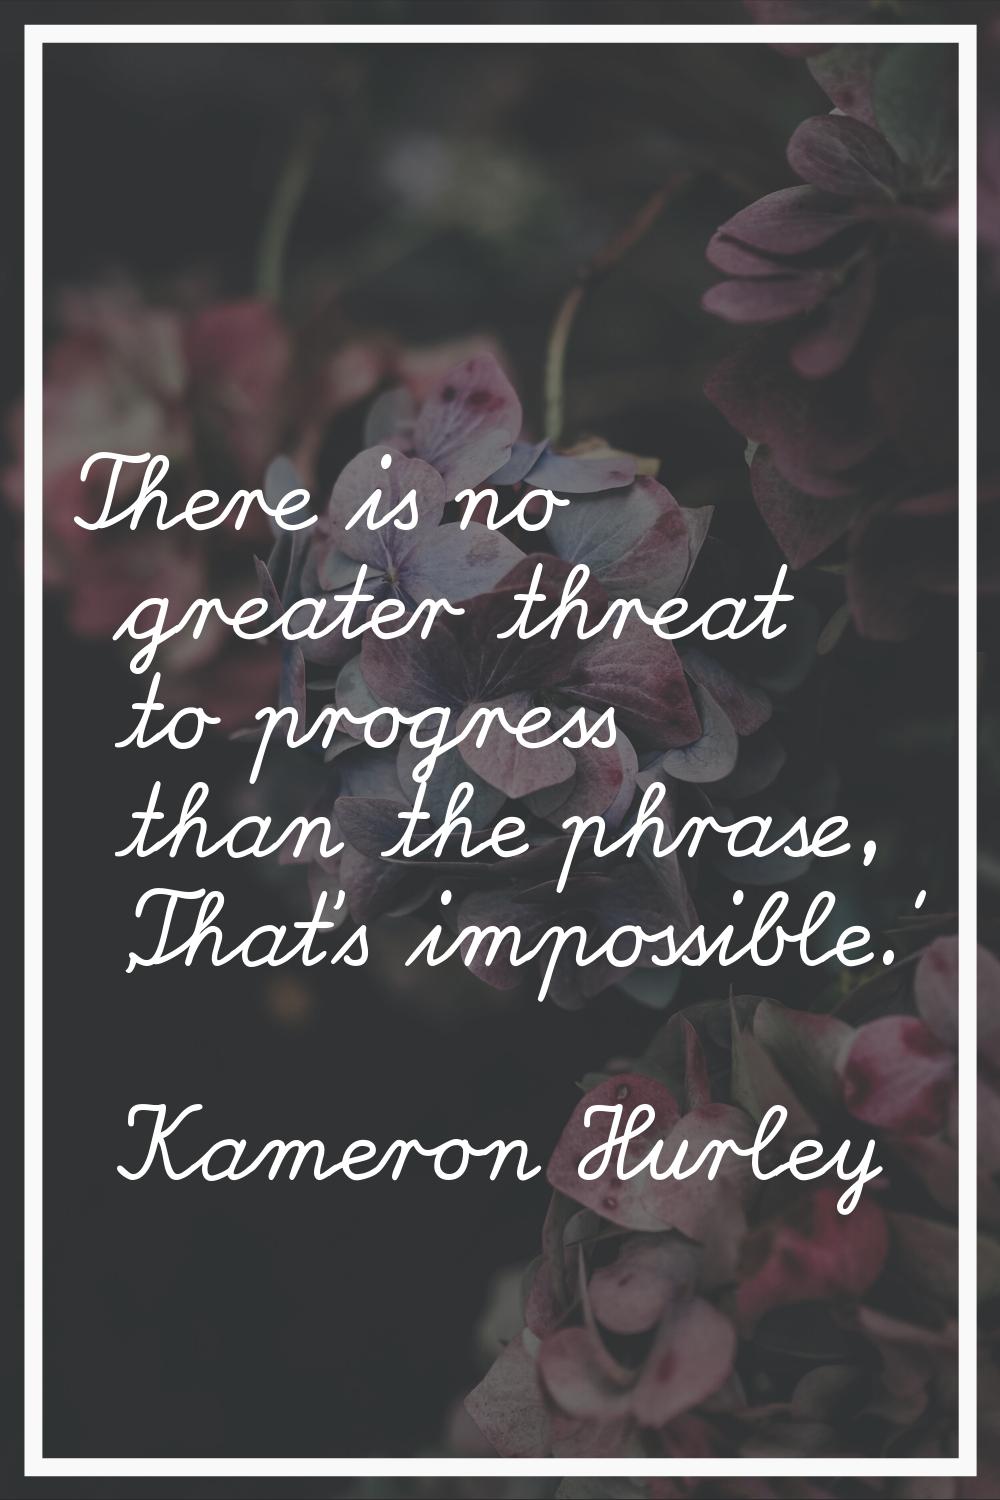 There is no greater threat to progress than the phrase, 'That's impossible.'